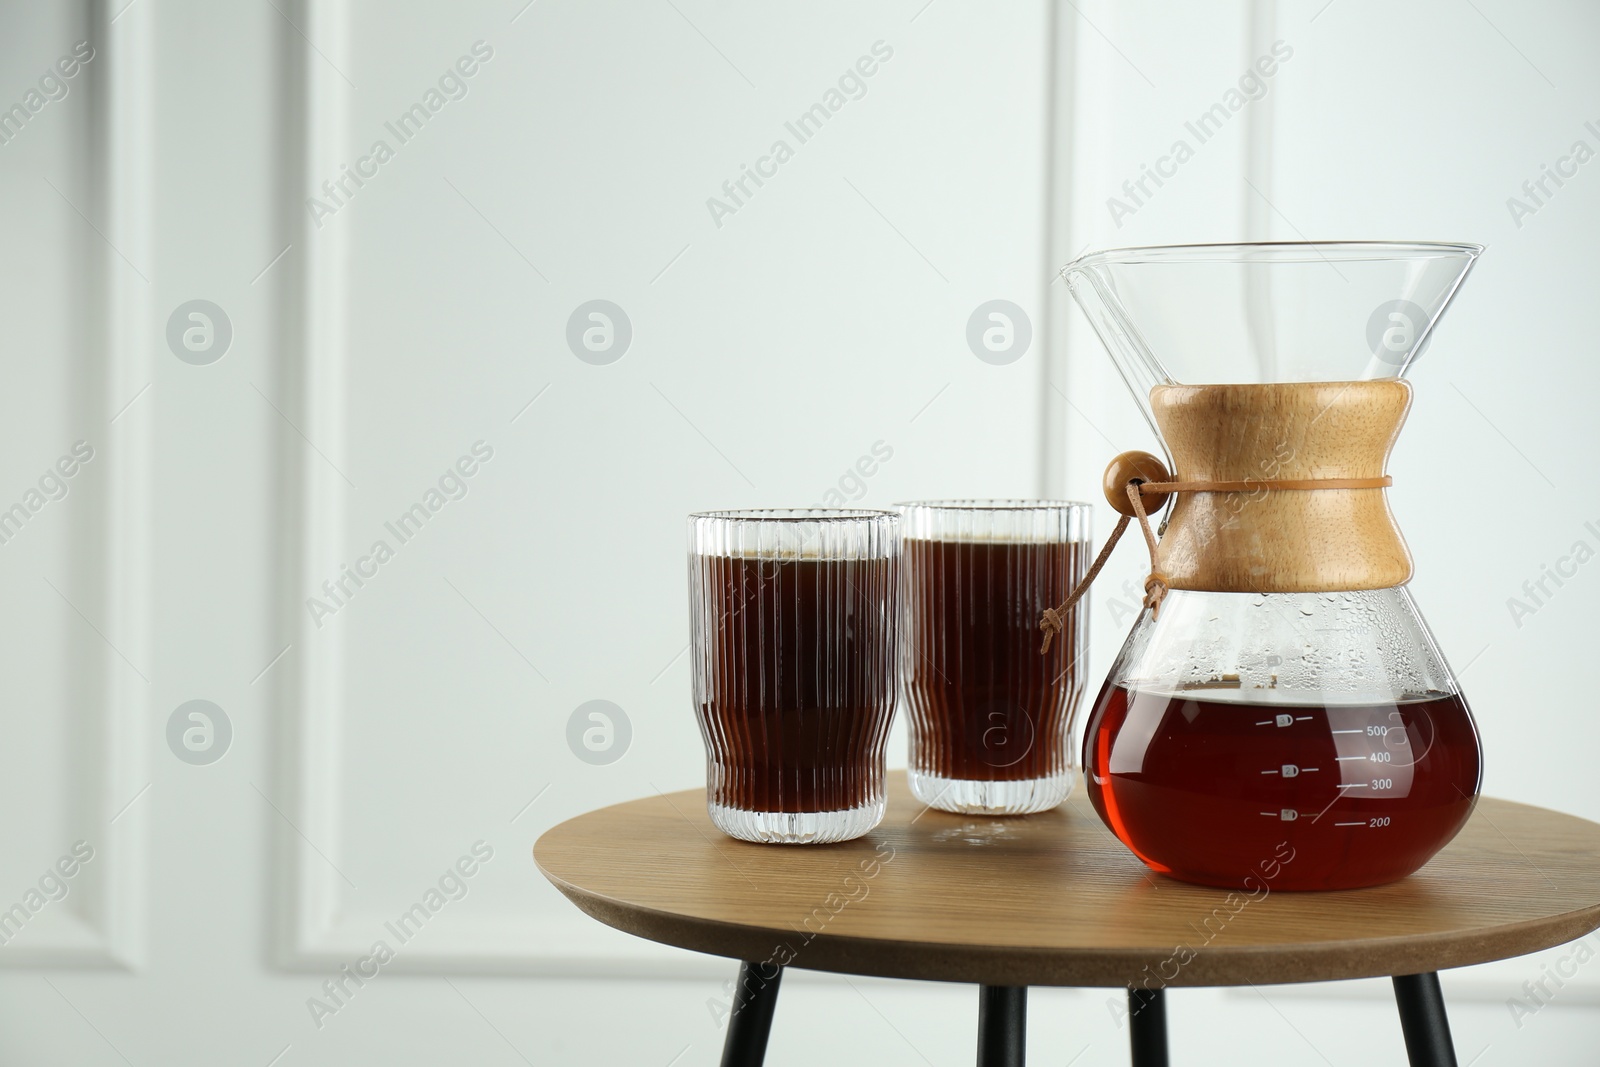 Photo of Glass chemex coffeemaker and glasses of coffee on wooden table against white wall, space for text